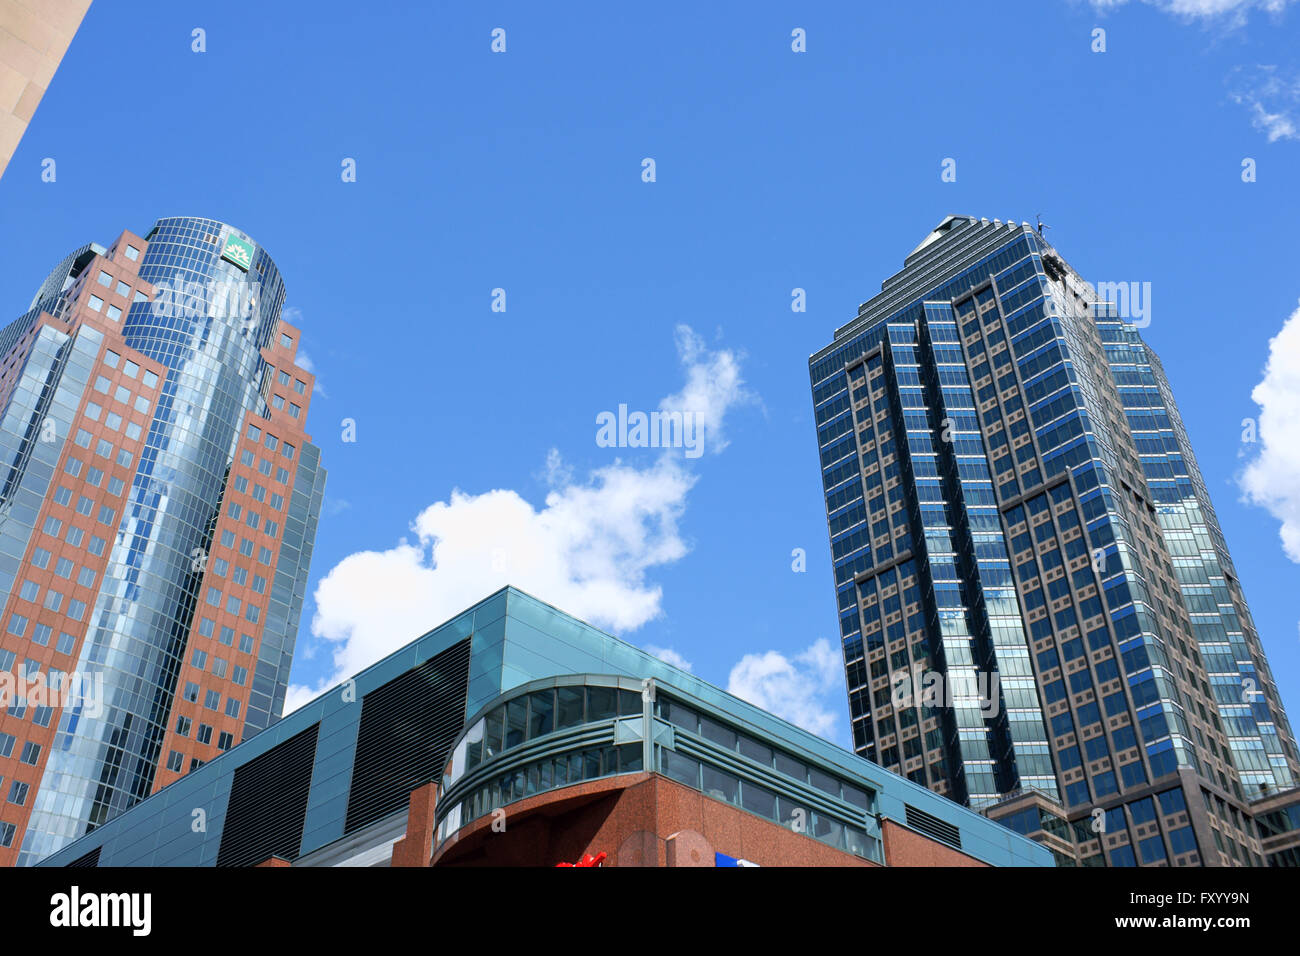 Montreal, Canada - July 28, 2008: glimpse of downtown Montreal and some modern and contemporary skyscrapers against a blue summer sky. Stock Photo